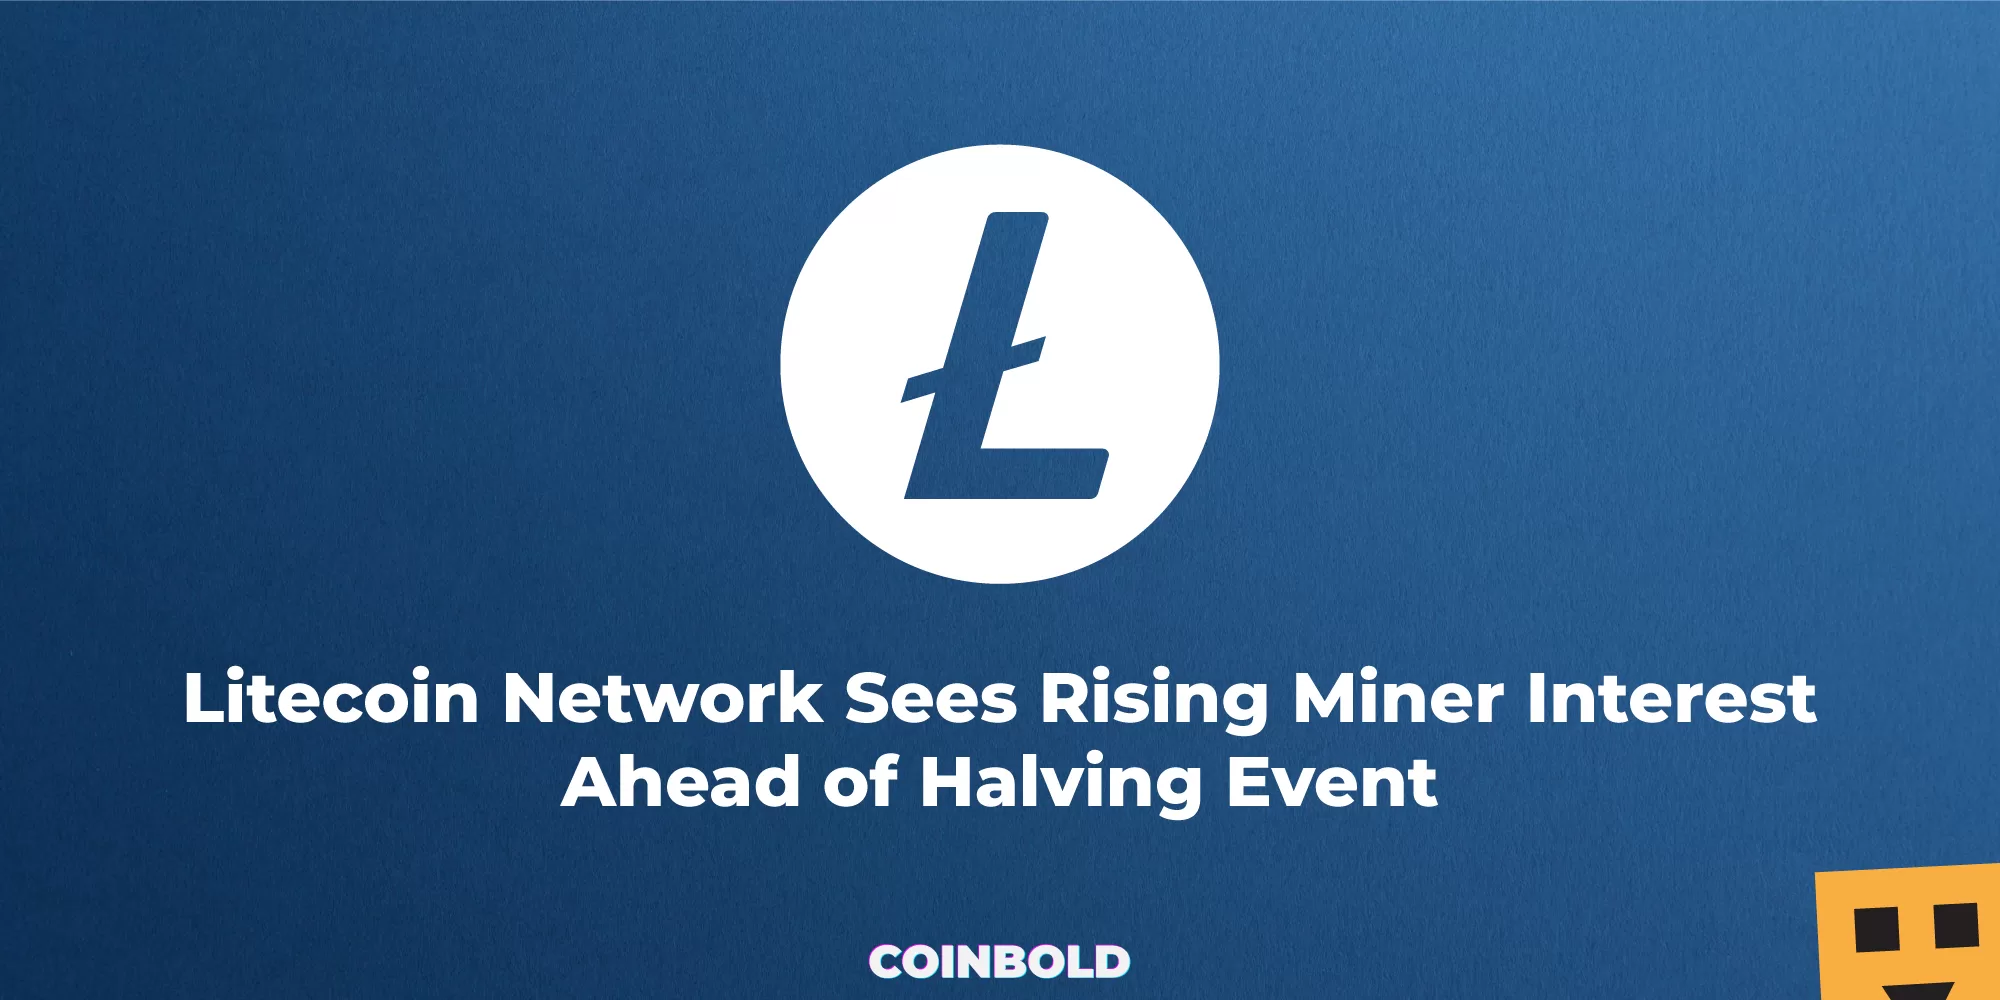 Litecoin Network Sees Rising Miner Interest Ahead of Halving Event